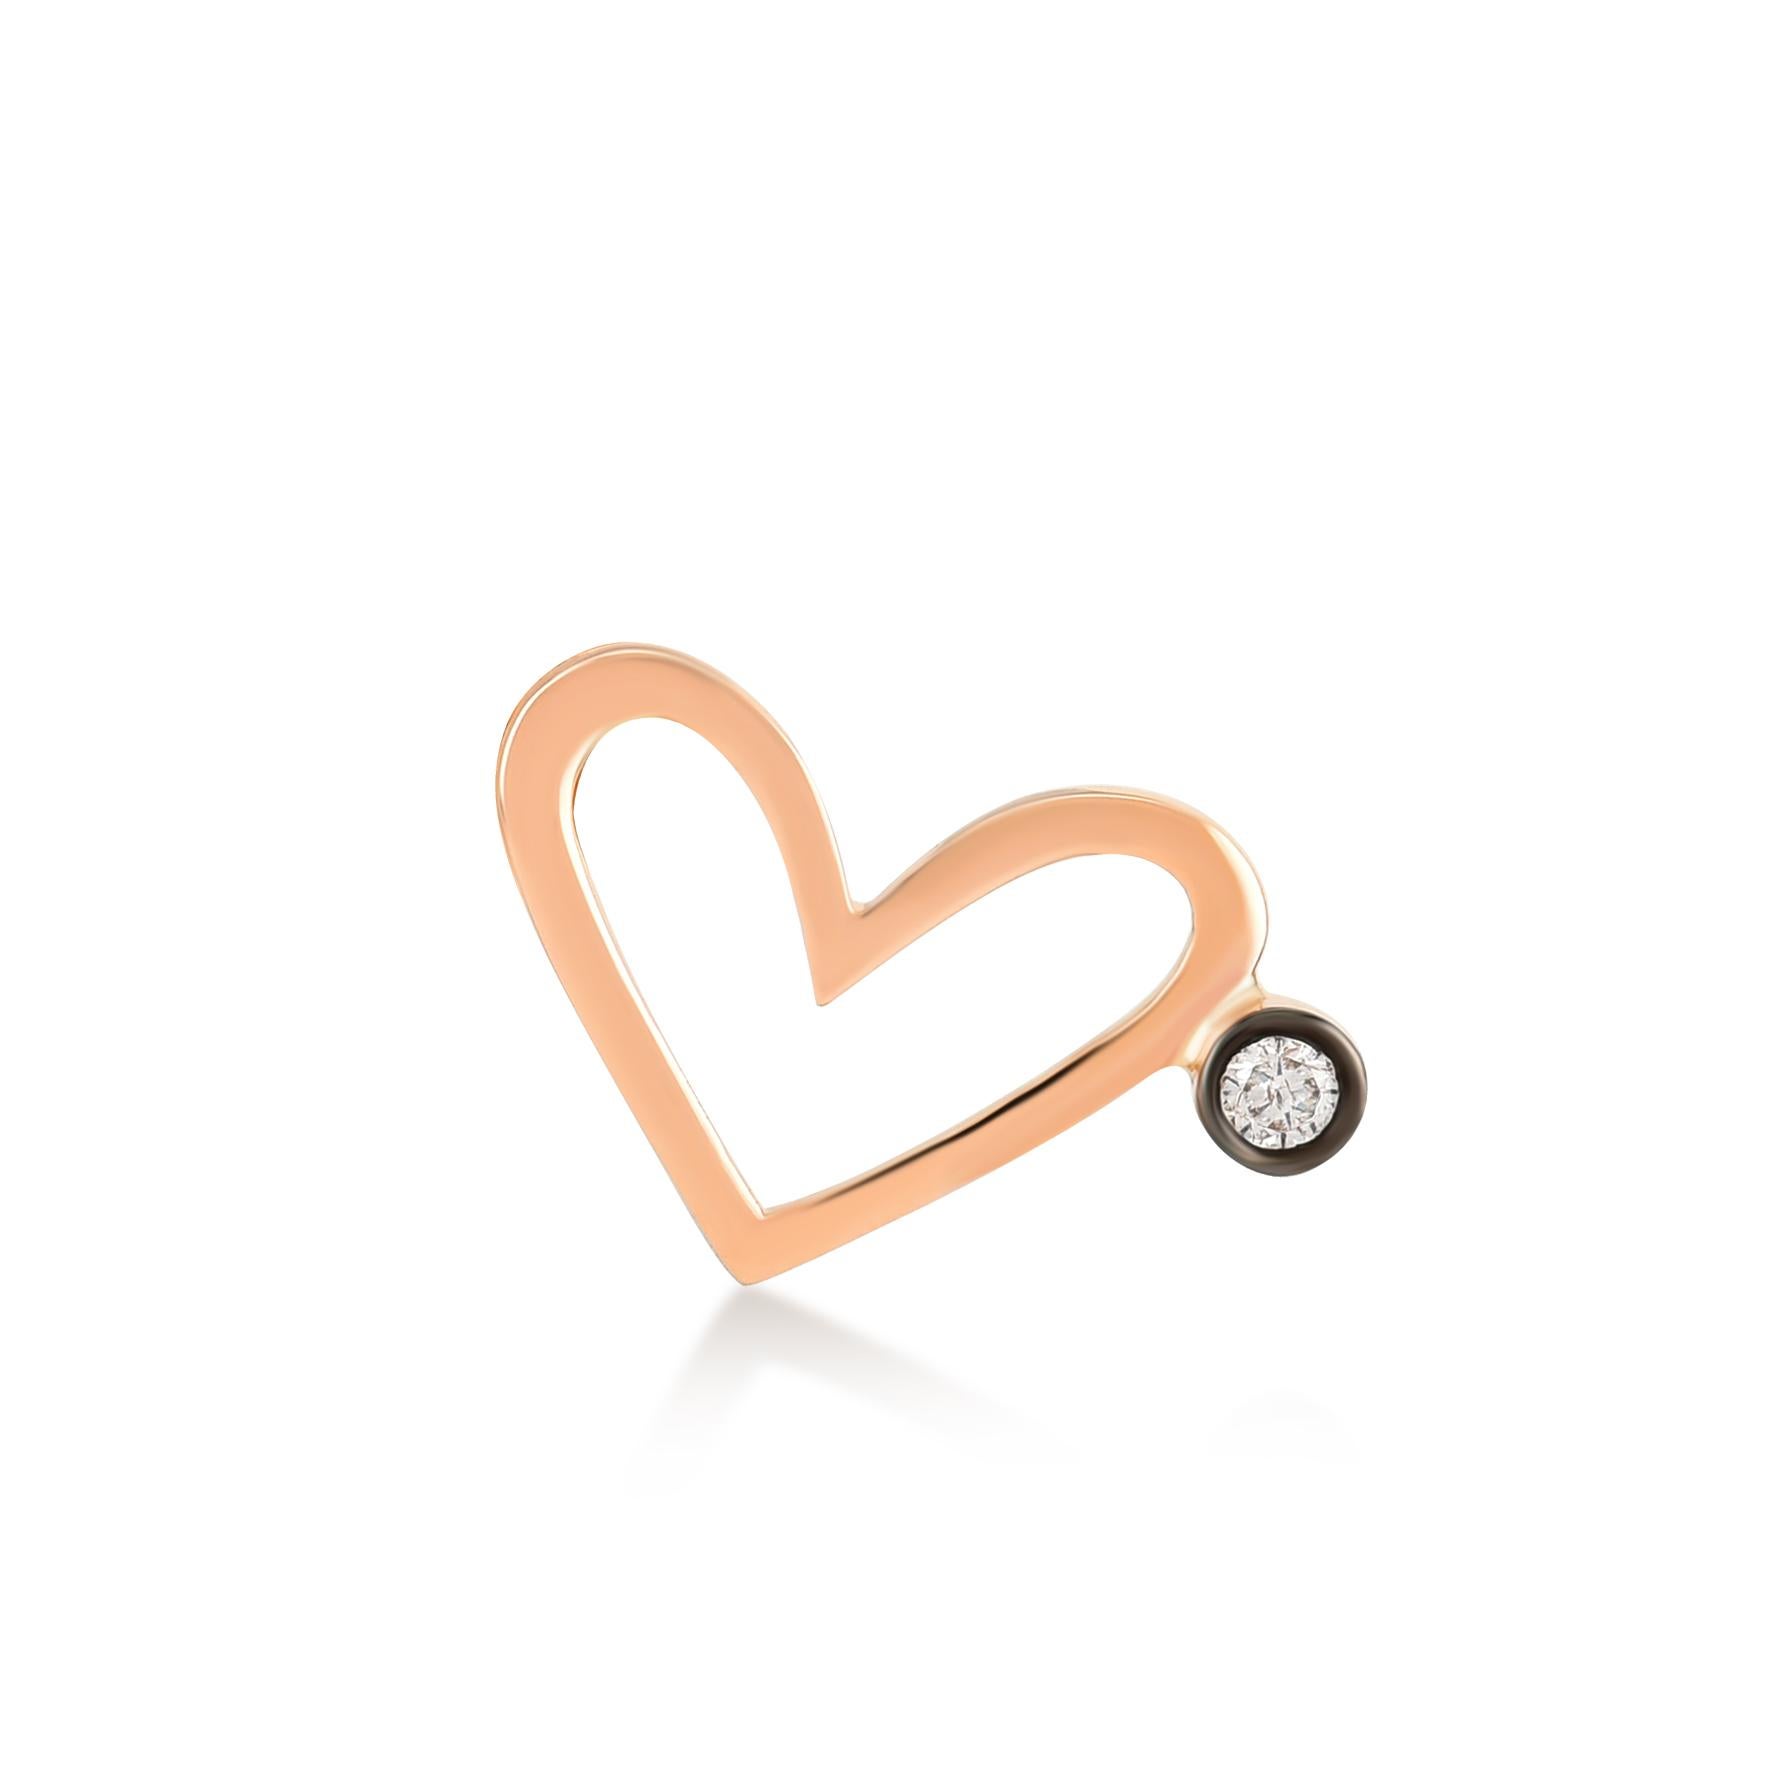 Simple heart 14k rose gold stud earring with diamond (single) by Selda Jewellery

Additional Information:-
Collection: You Are My Star Collection
14k Rose gold
0.02ct White diamond
Height 1cm